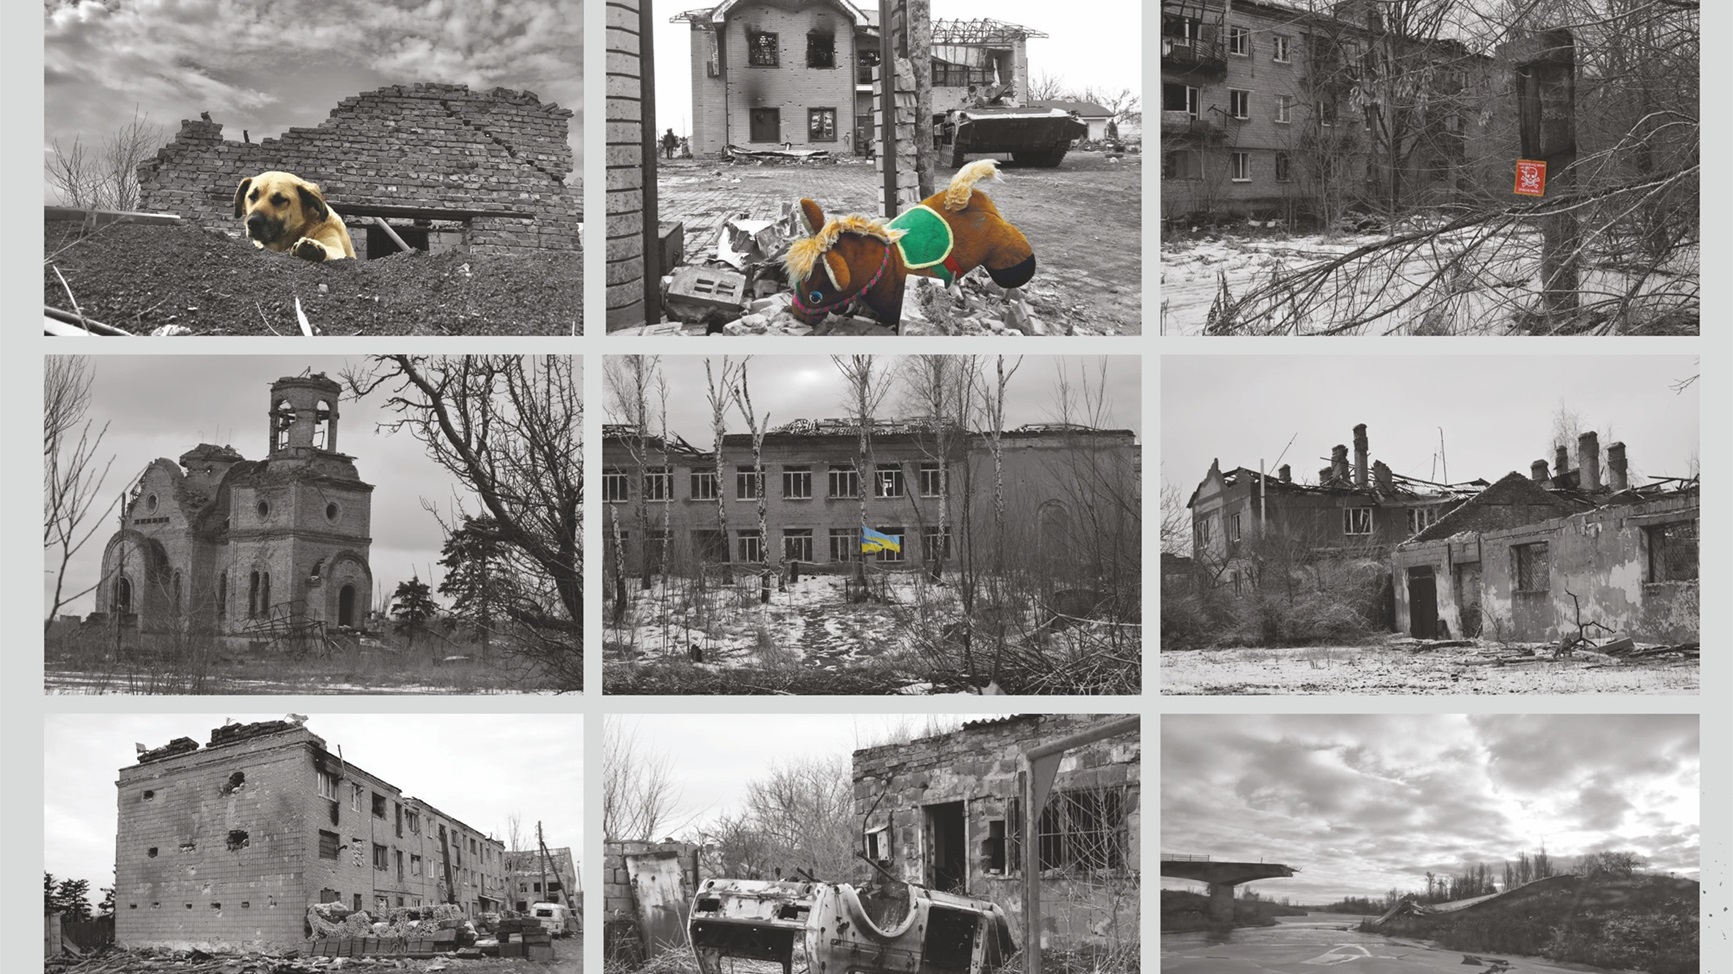 Wiped from the face of the Earth - Exhibition of photographs from Ukraine for the second anniversary of the war